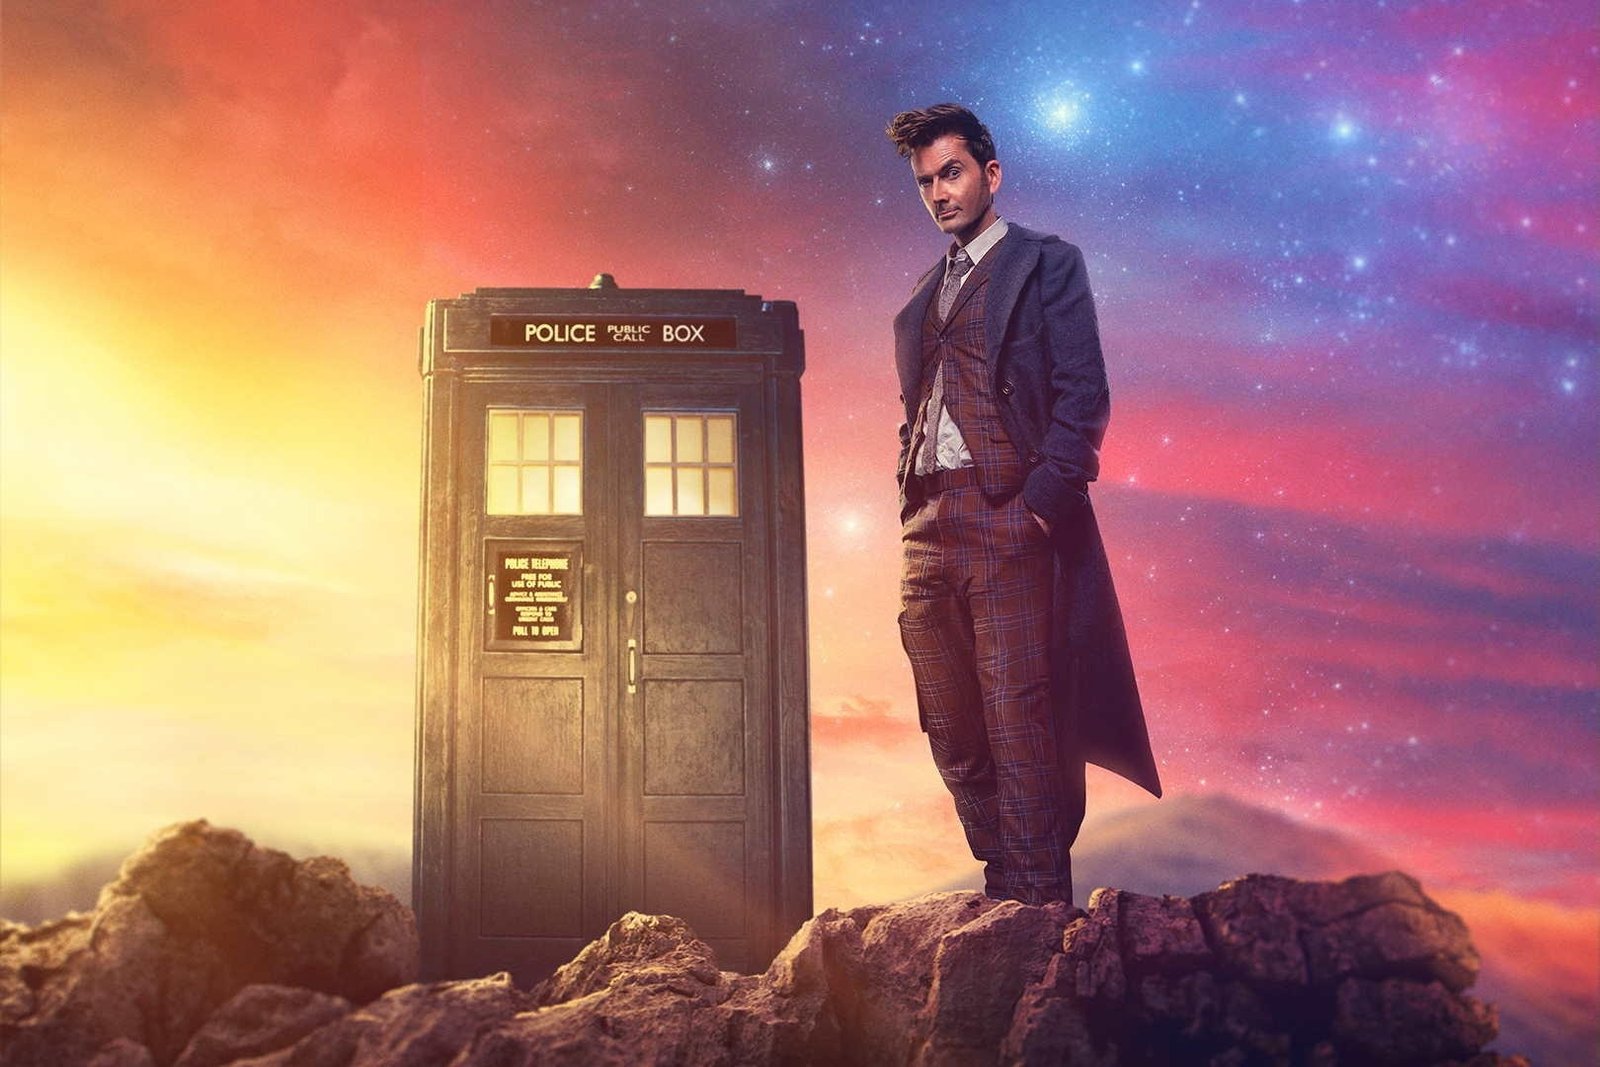 Here’s the Brand New Trailer for the Doctor Who 60th Anniversary Specials!